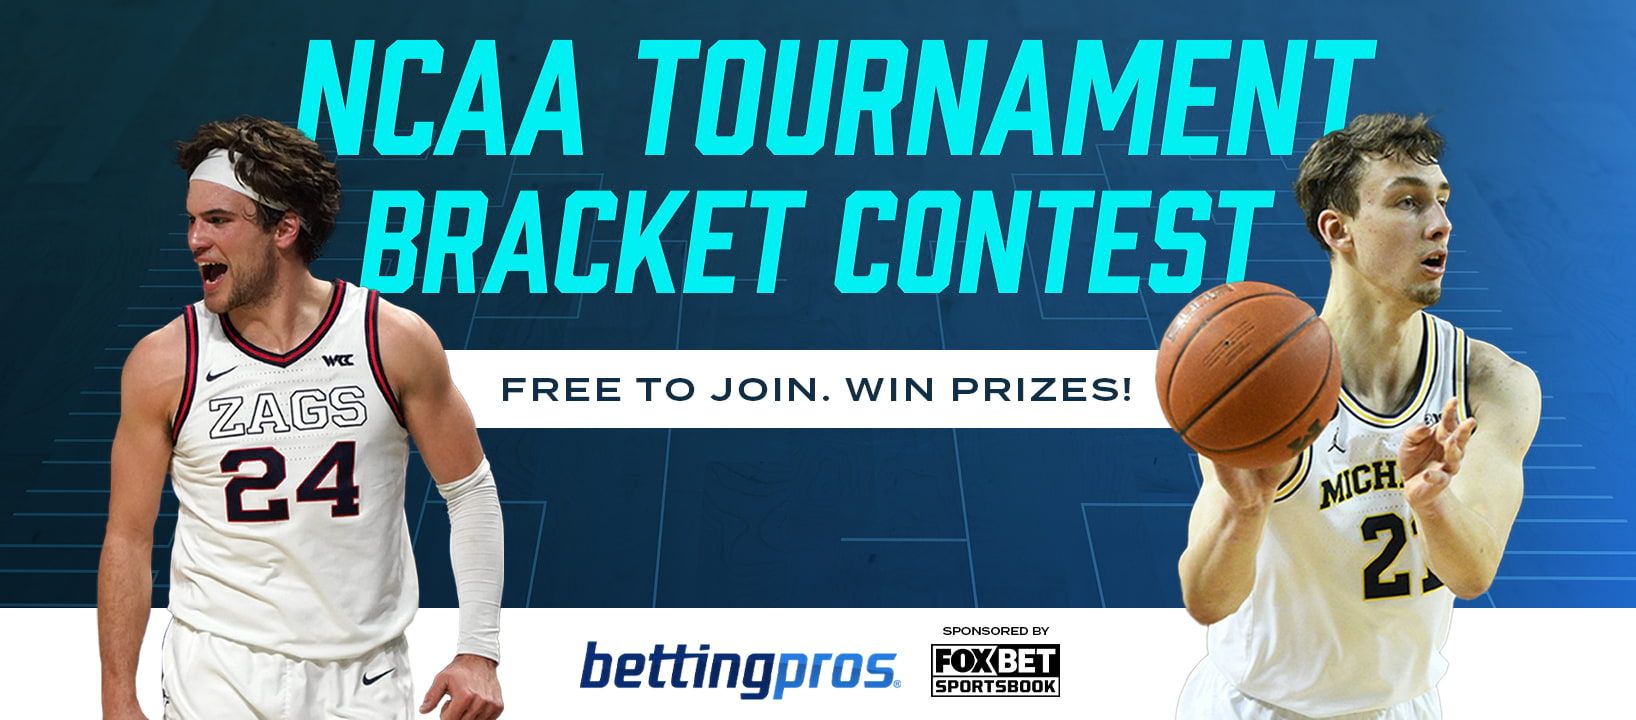 3/15/2021 March Madness Is Here Optimize Your Bracket and Enter Our Free Contest!